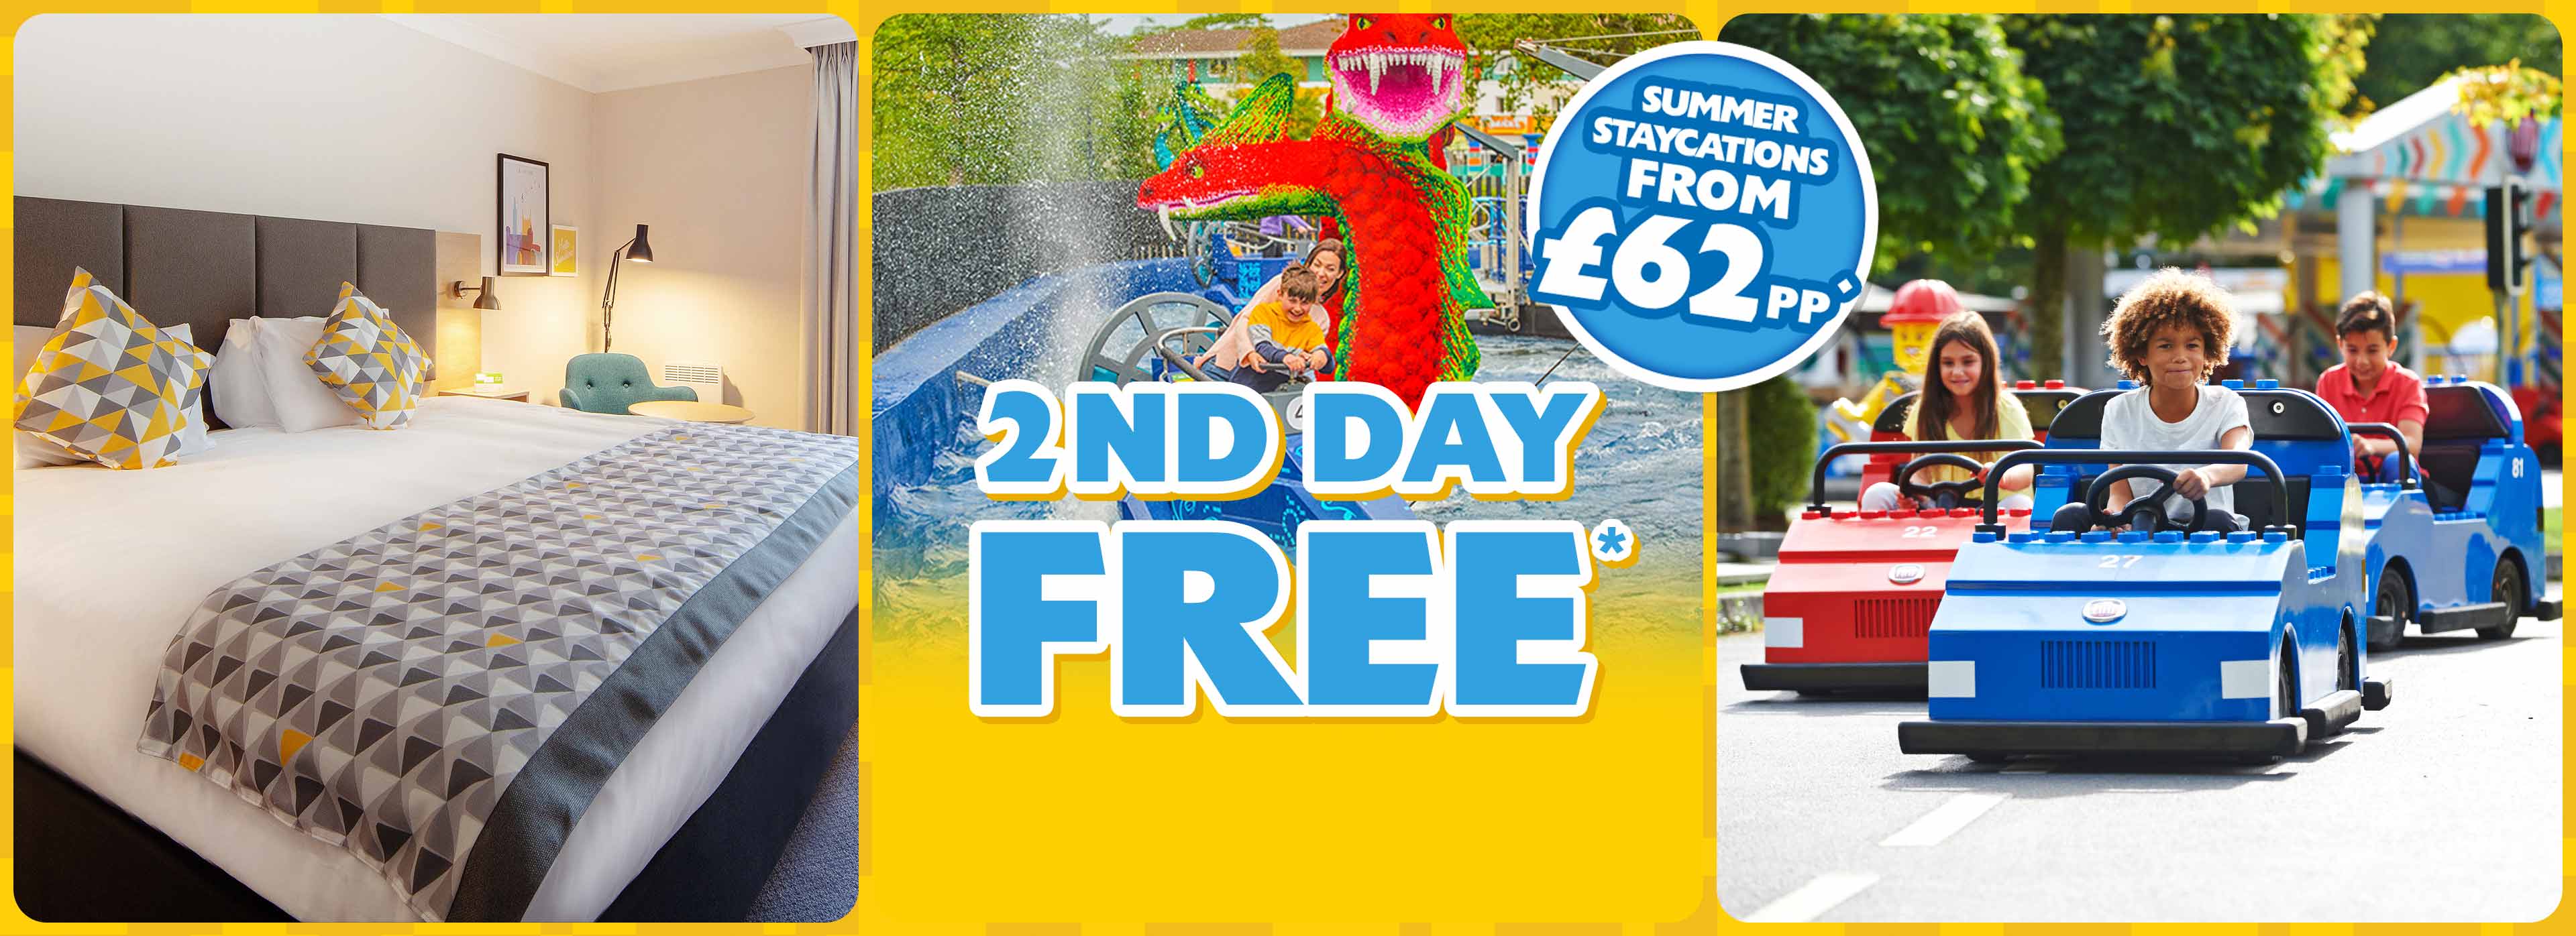 2nd day free offer with LEGOLAND Holidays